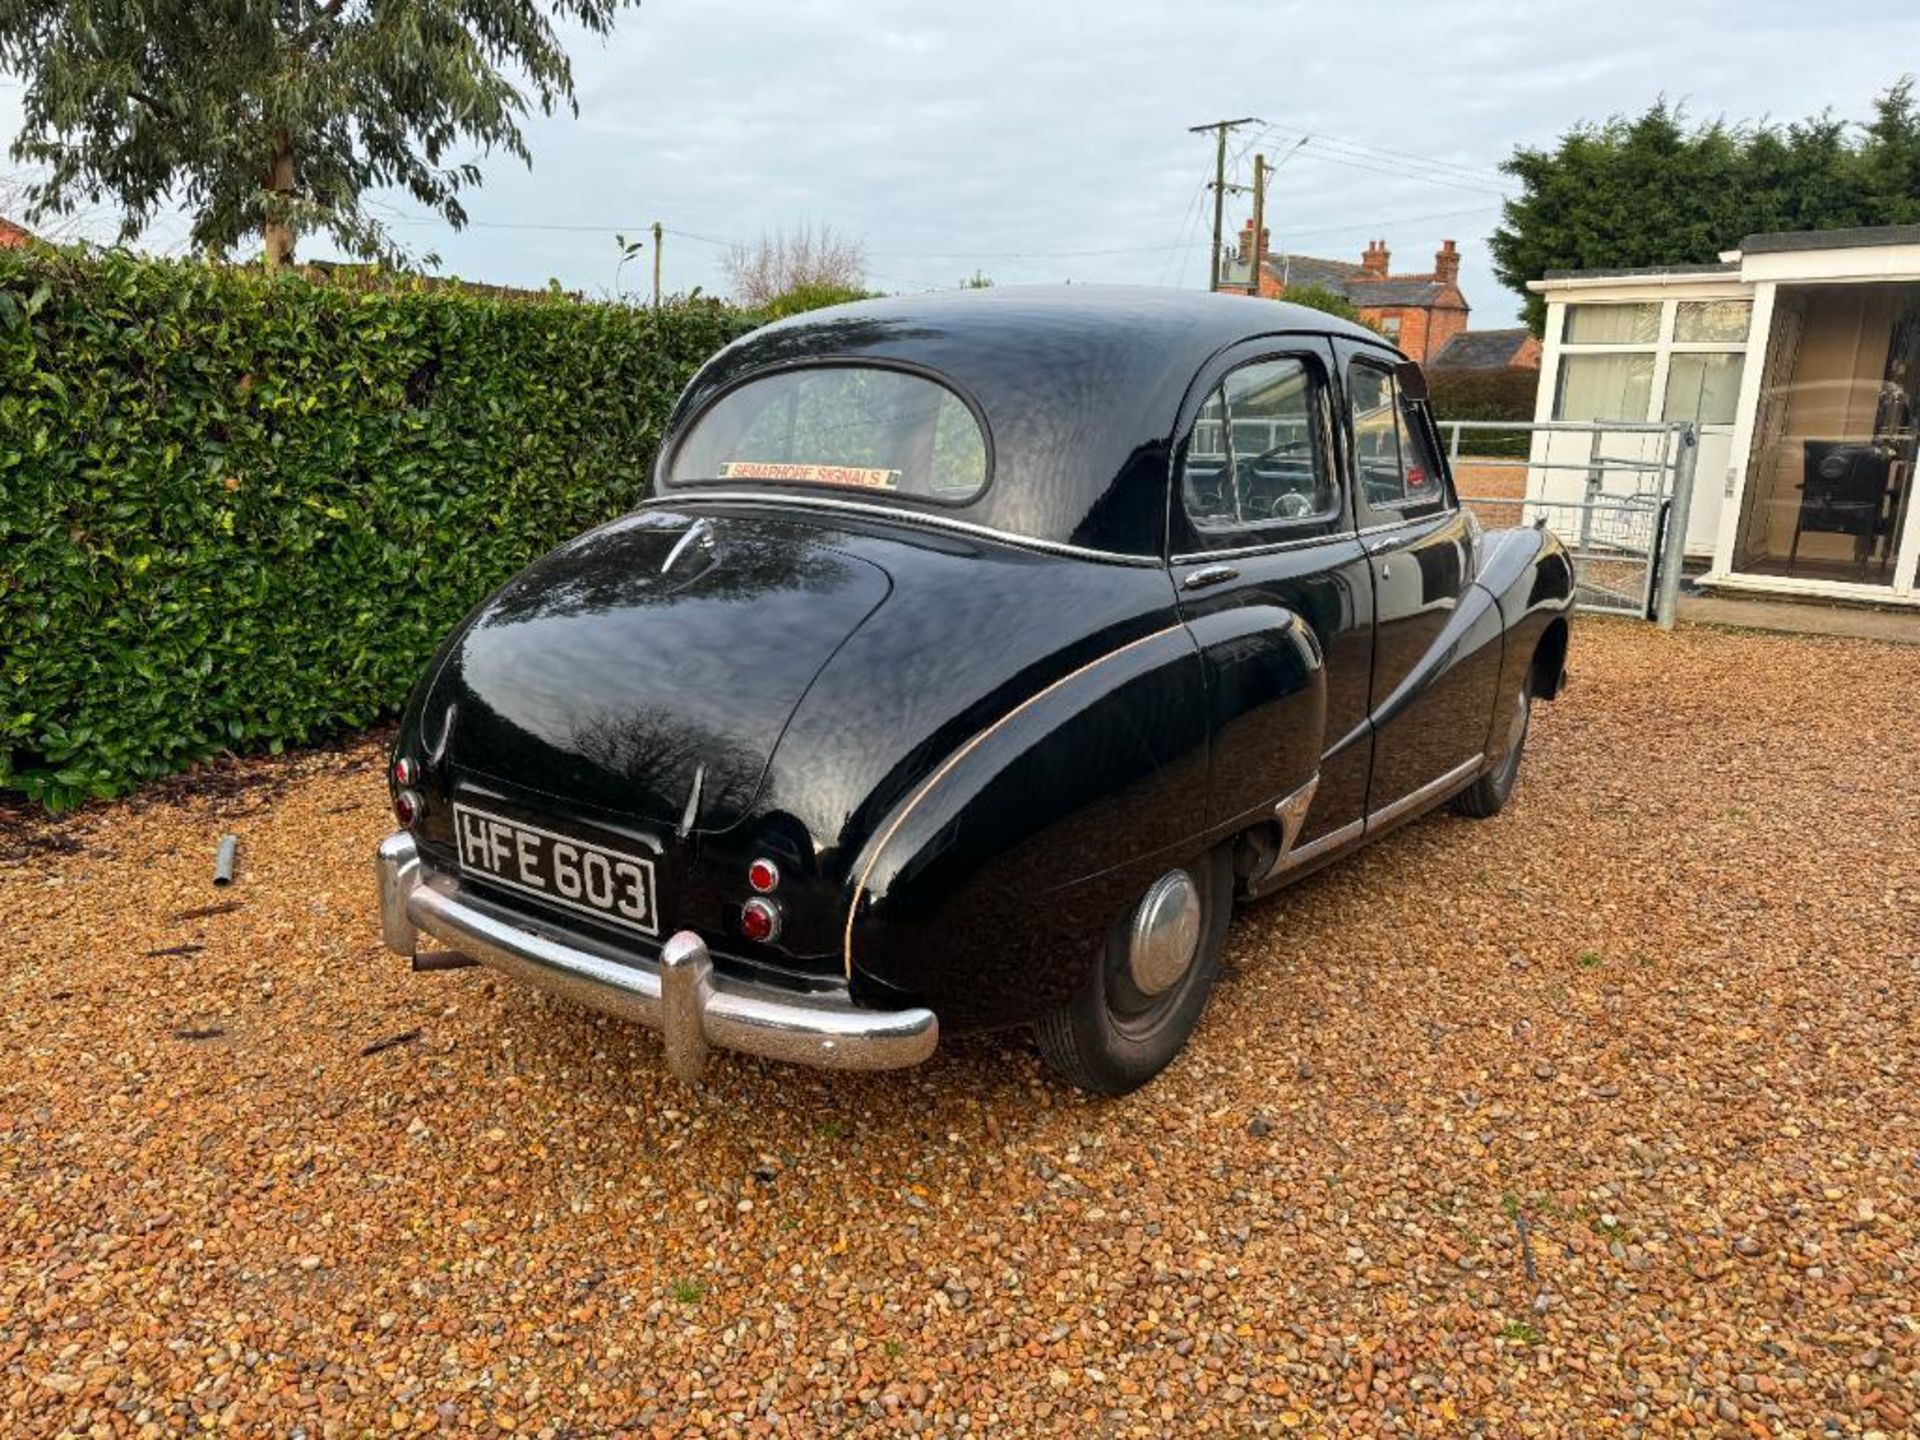 1954 Austin A40 Somerset black saloon car with 1200cc petrol engine, red leather interior and spare - Image 8 of 24